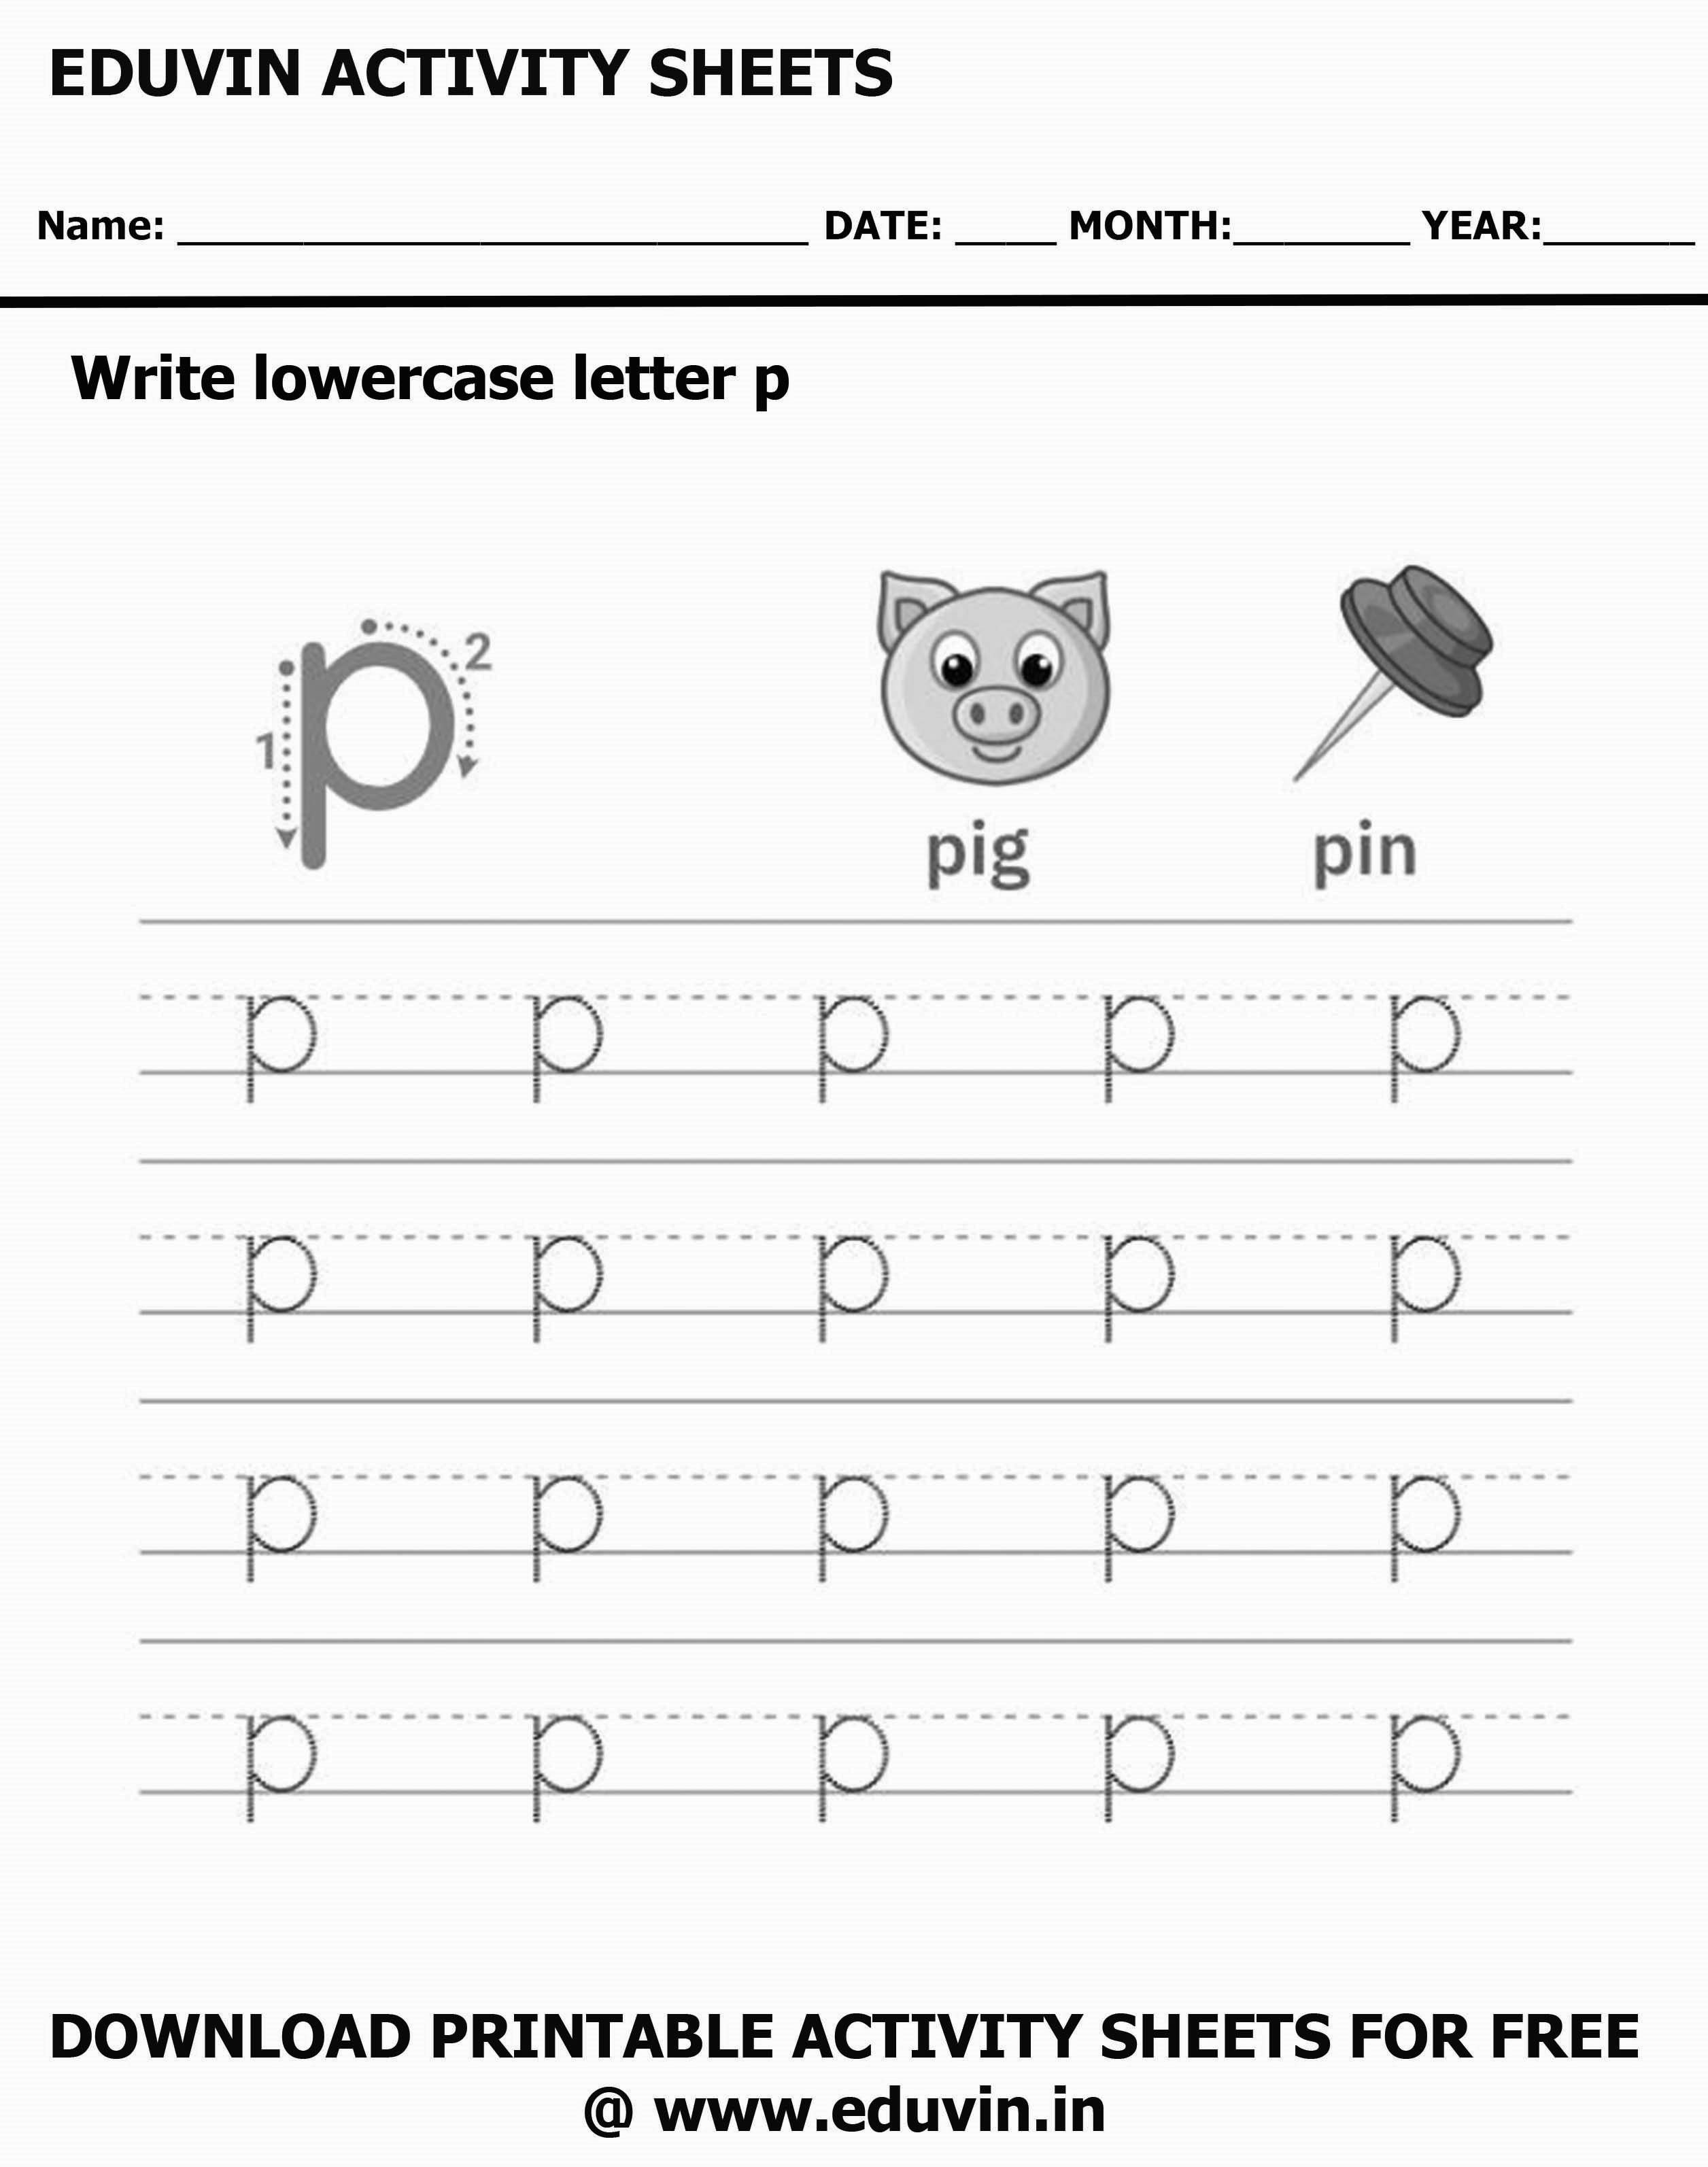 Lowercase Alphabet p Worksheets | Letter p Trace and Write Activity Sheet For Tracing and Letter Writing For Kids